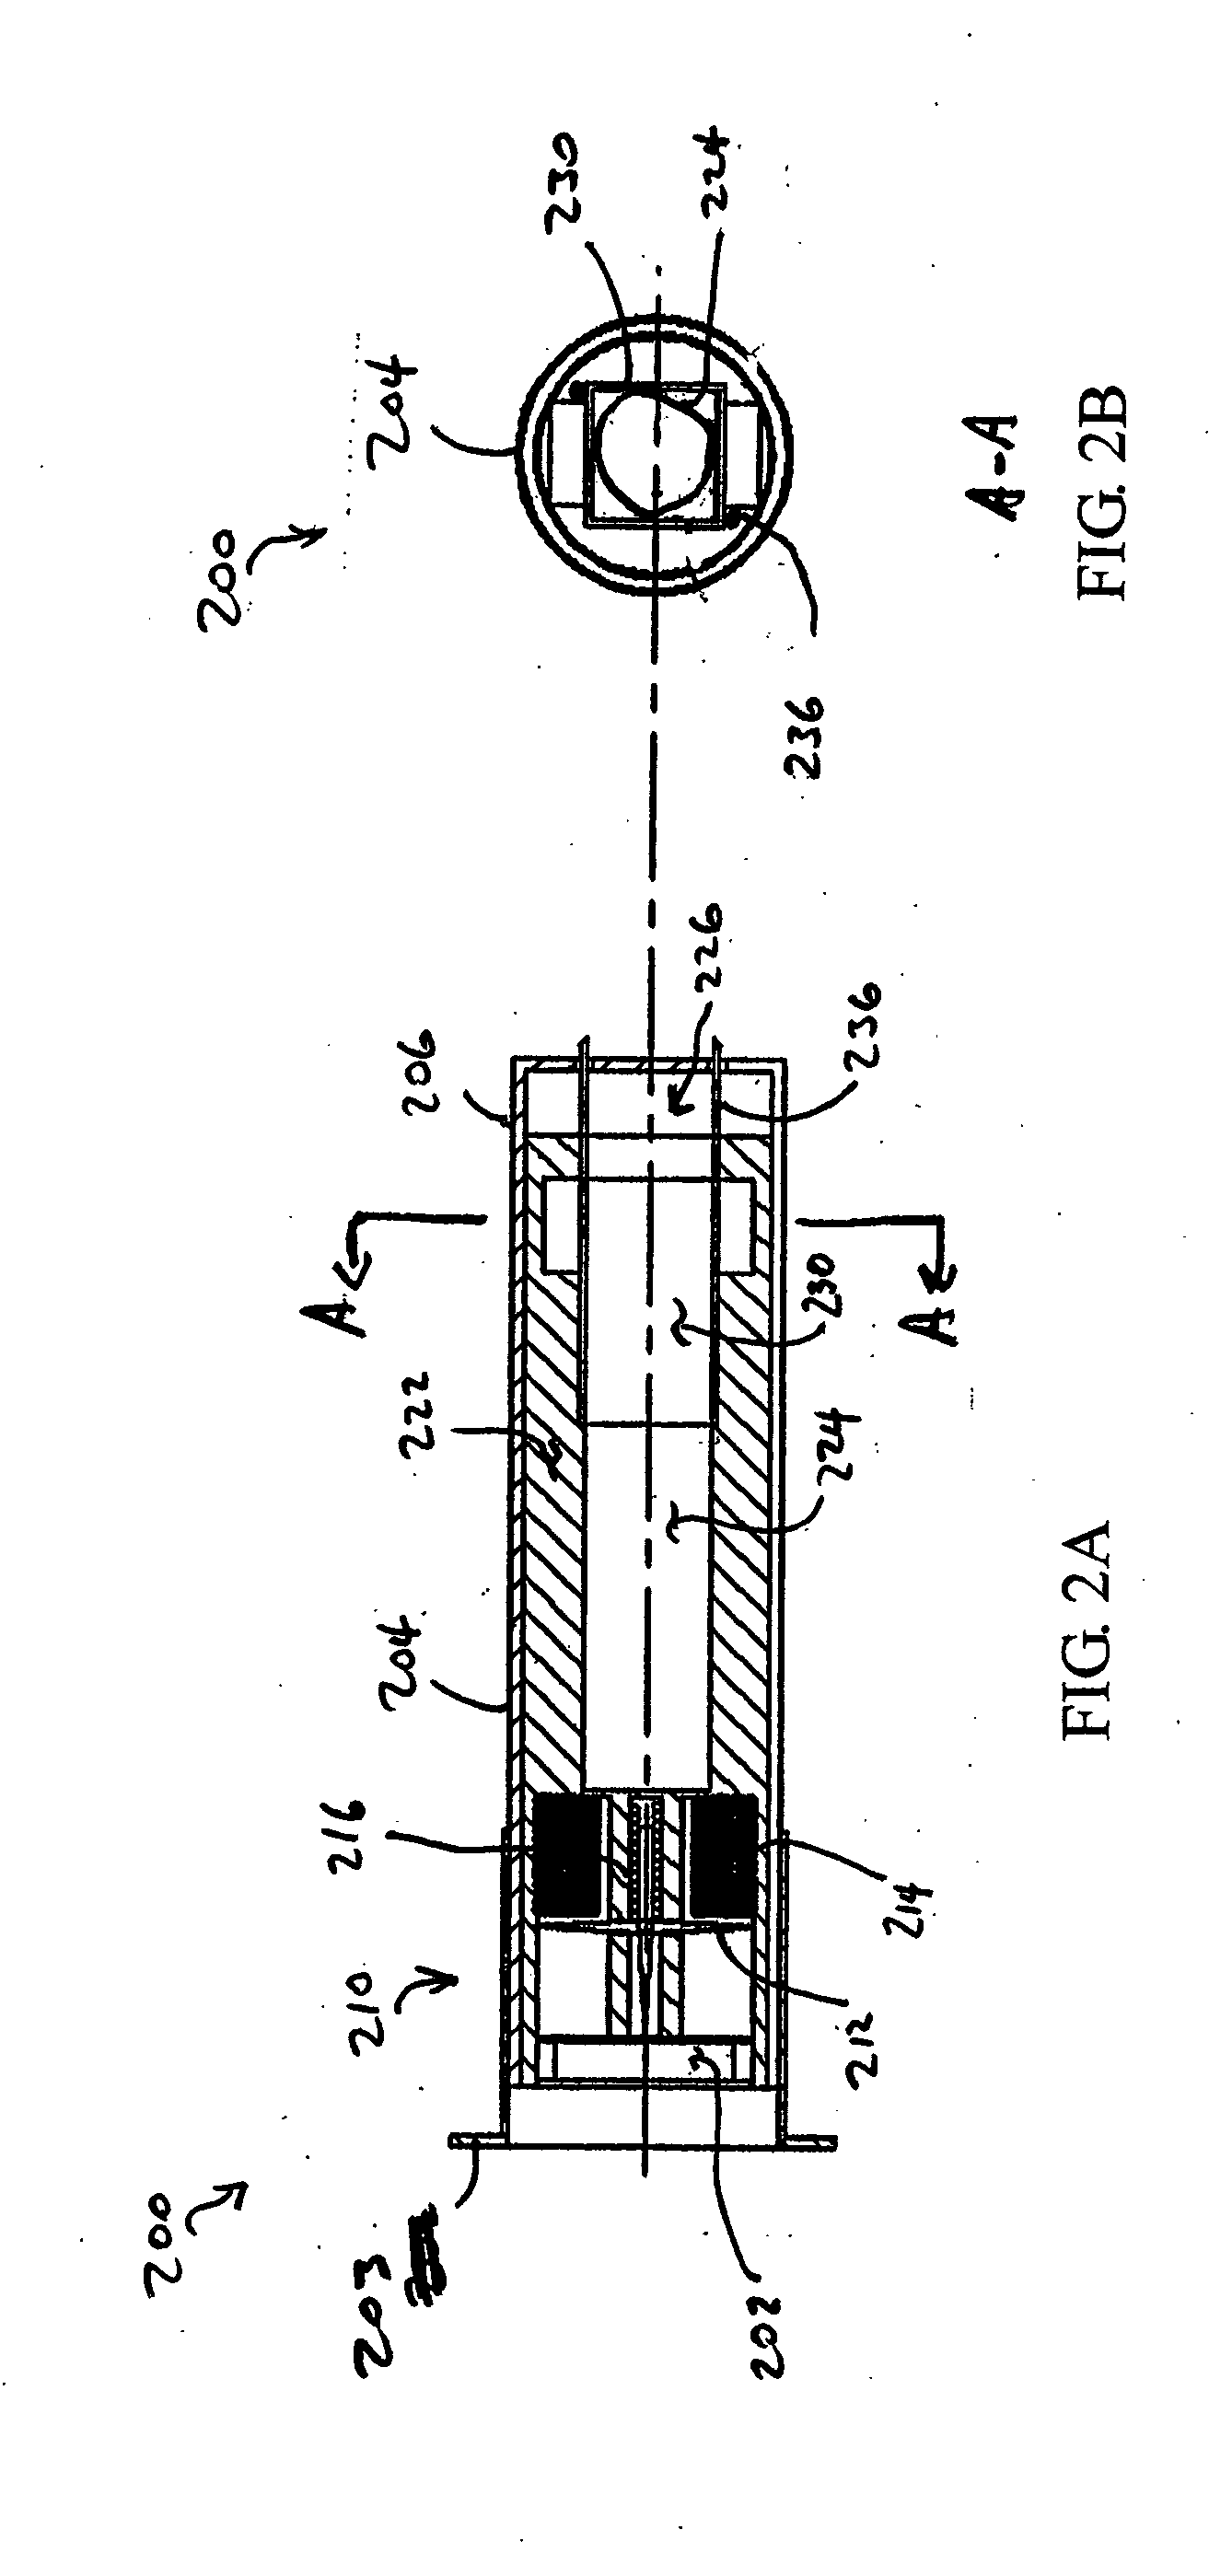 Systems and methods using an electrified projectile